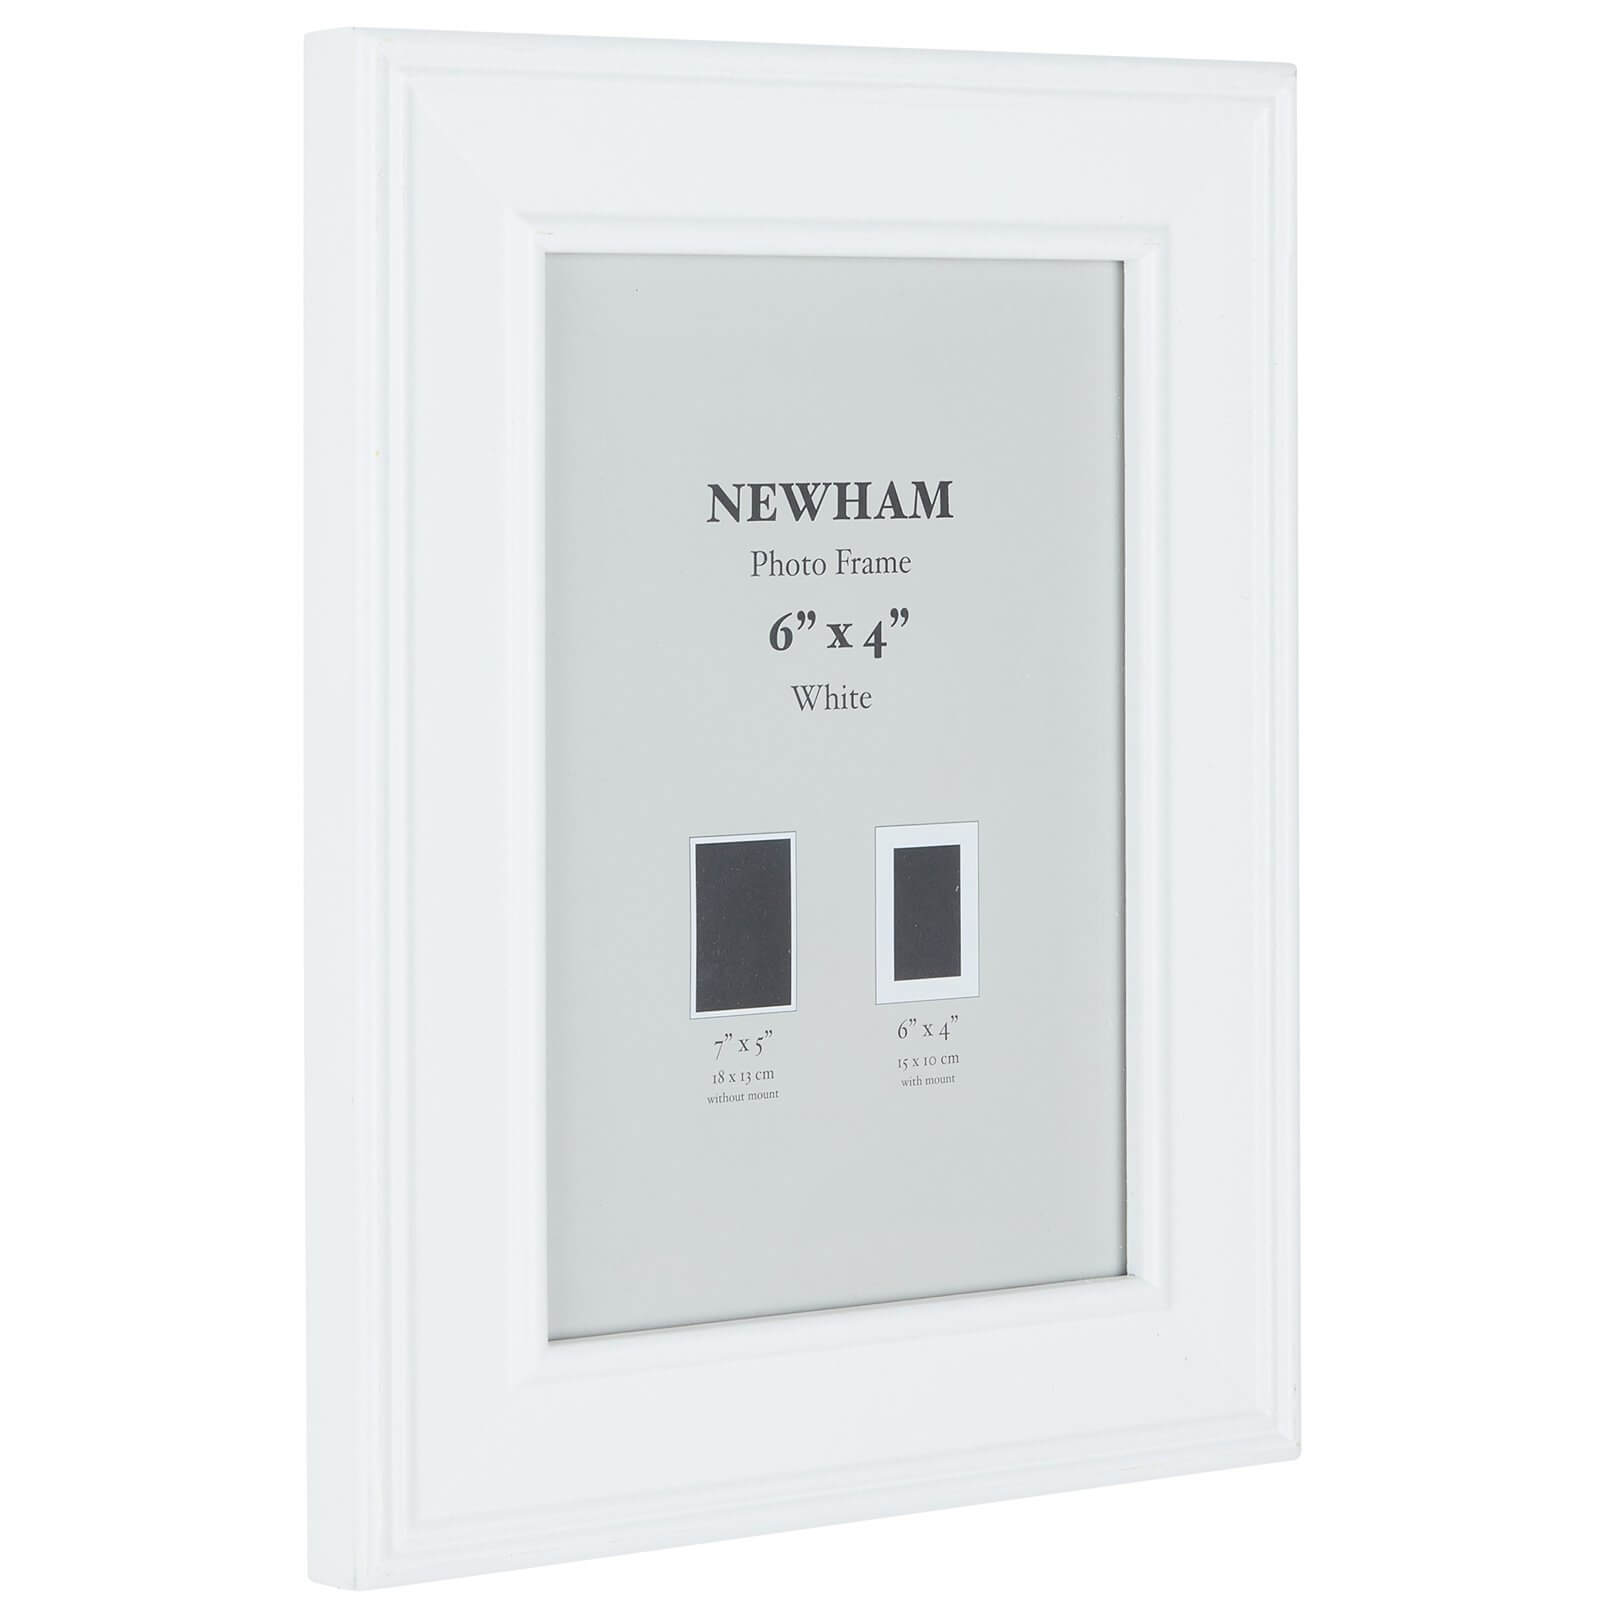 Newham Picture Frame 6 x 4 - White